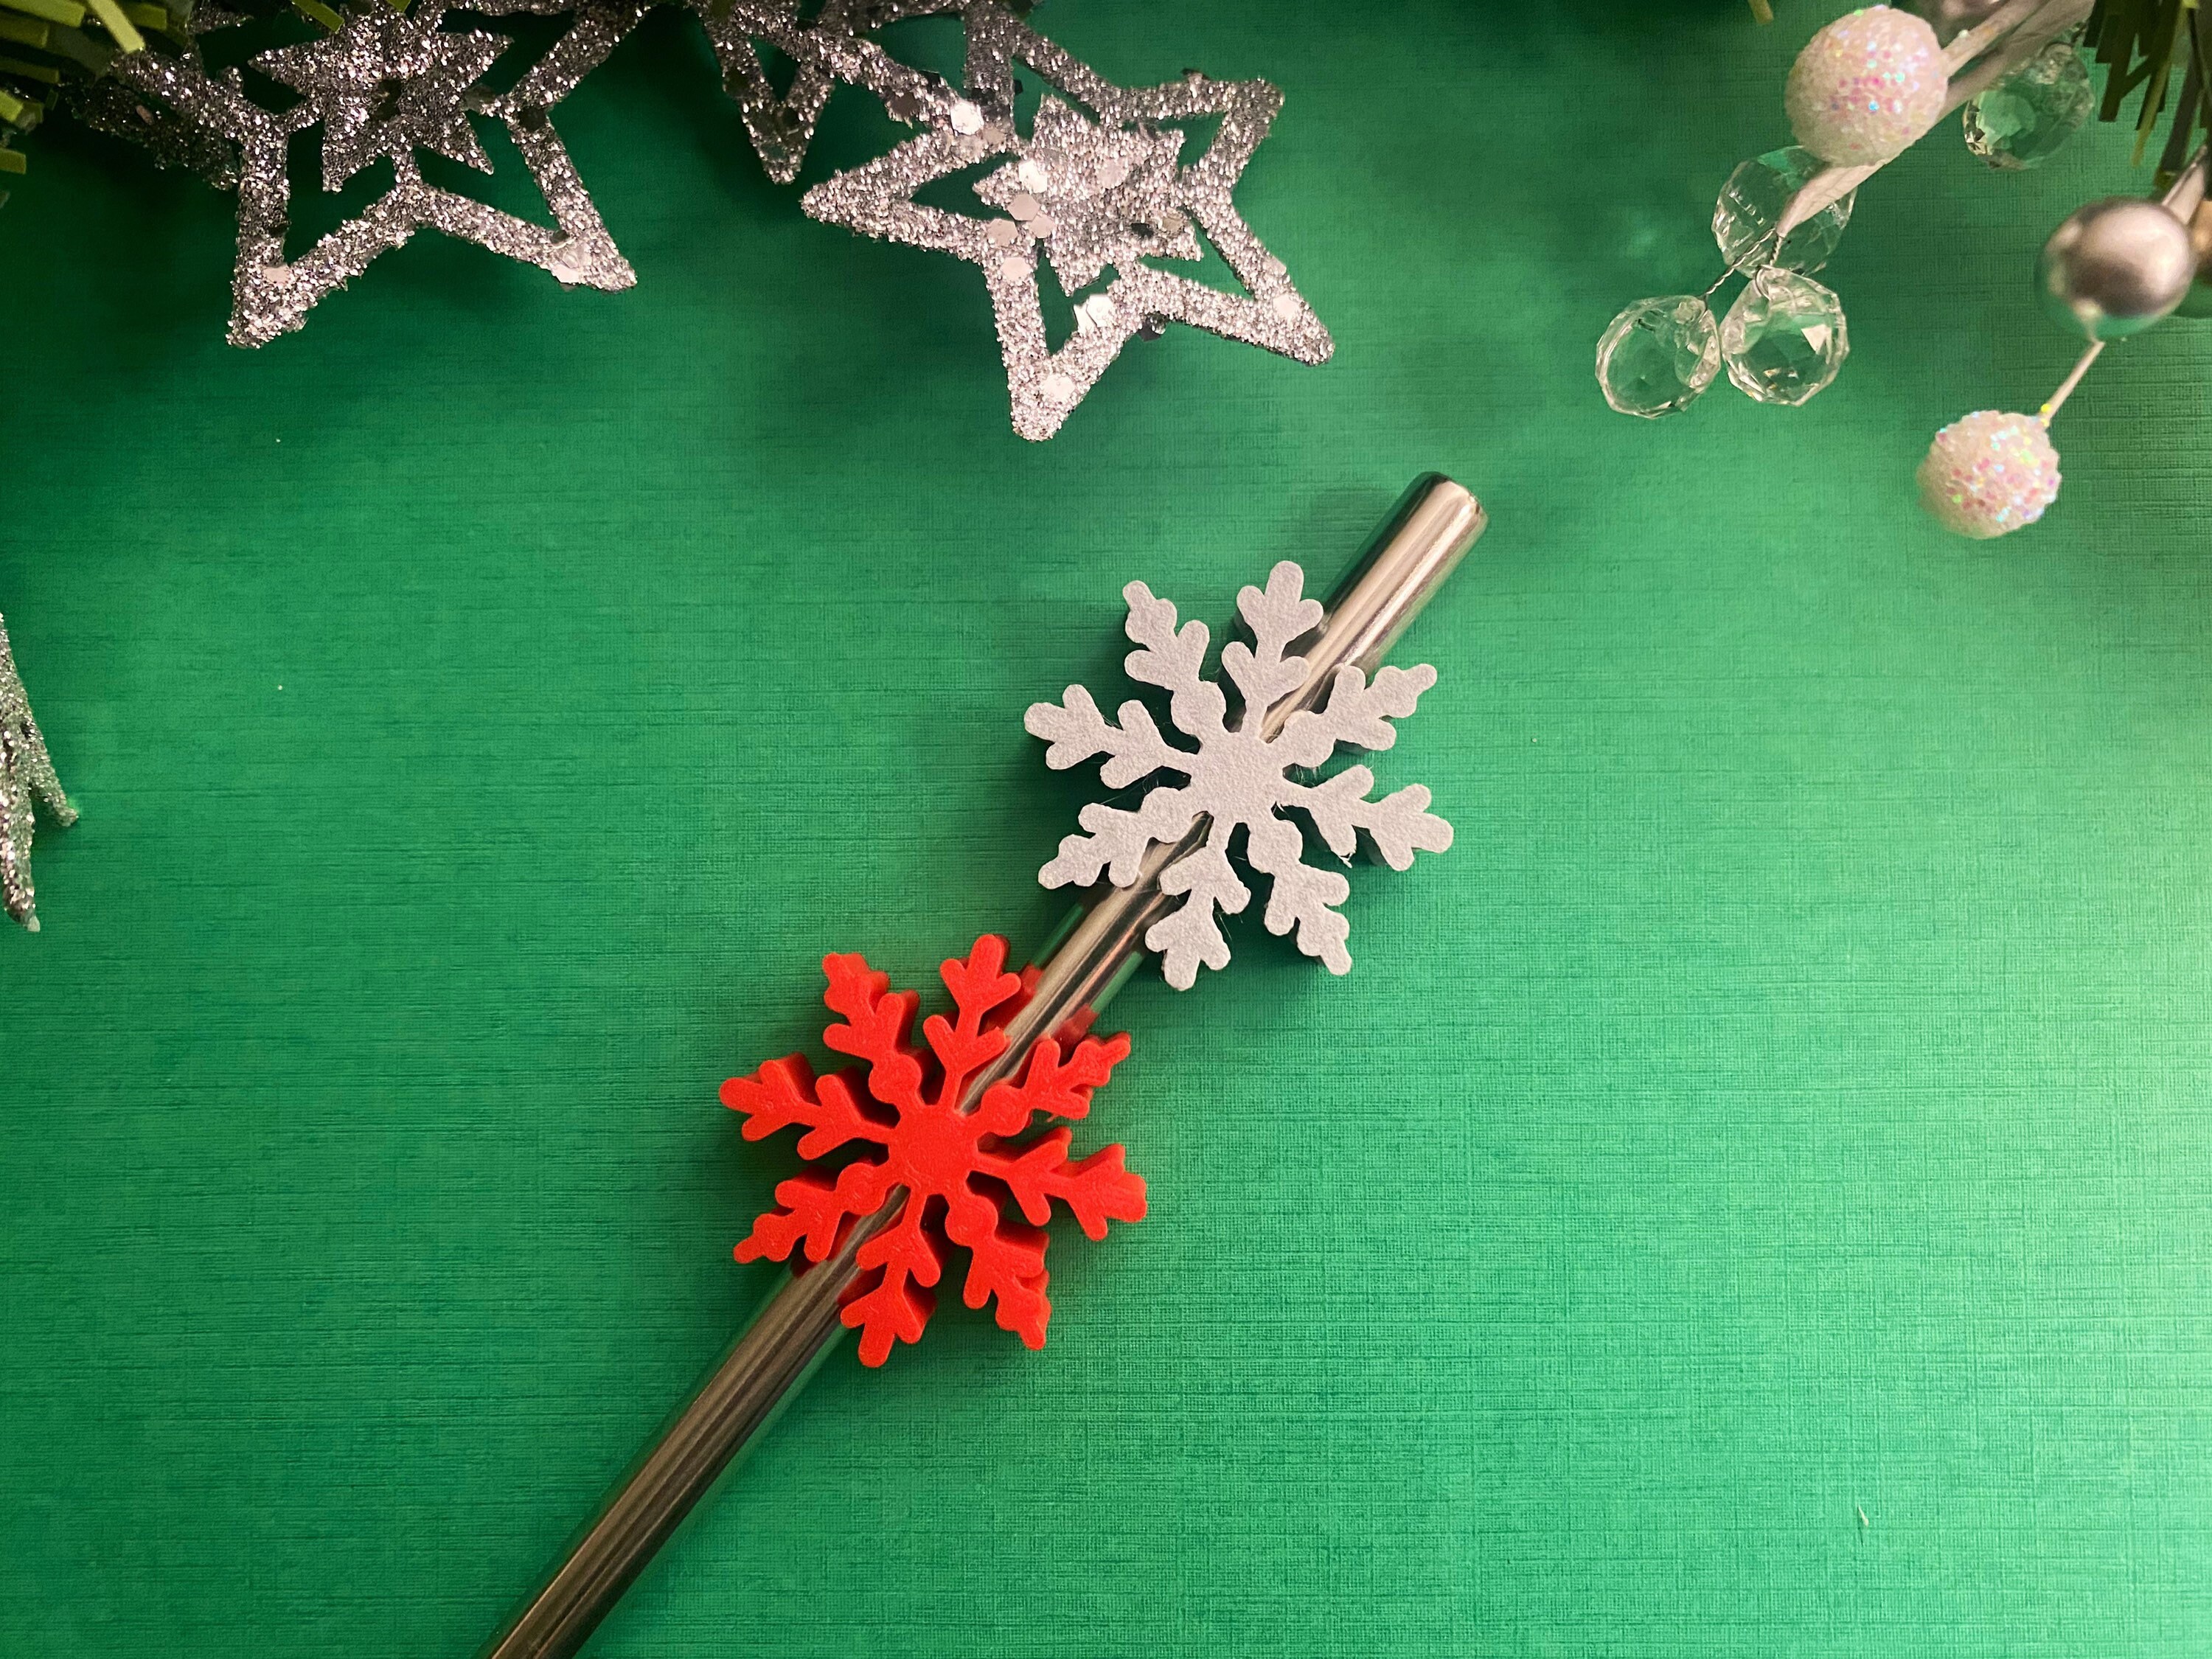 10 Piece Set Christmas SNOWFLAKE Straw Toppers – The Tumbler Grip